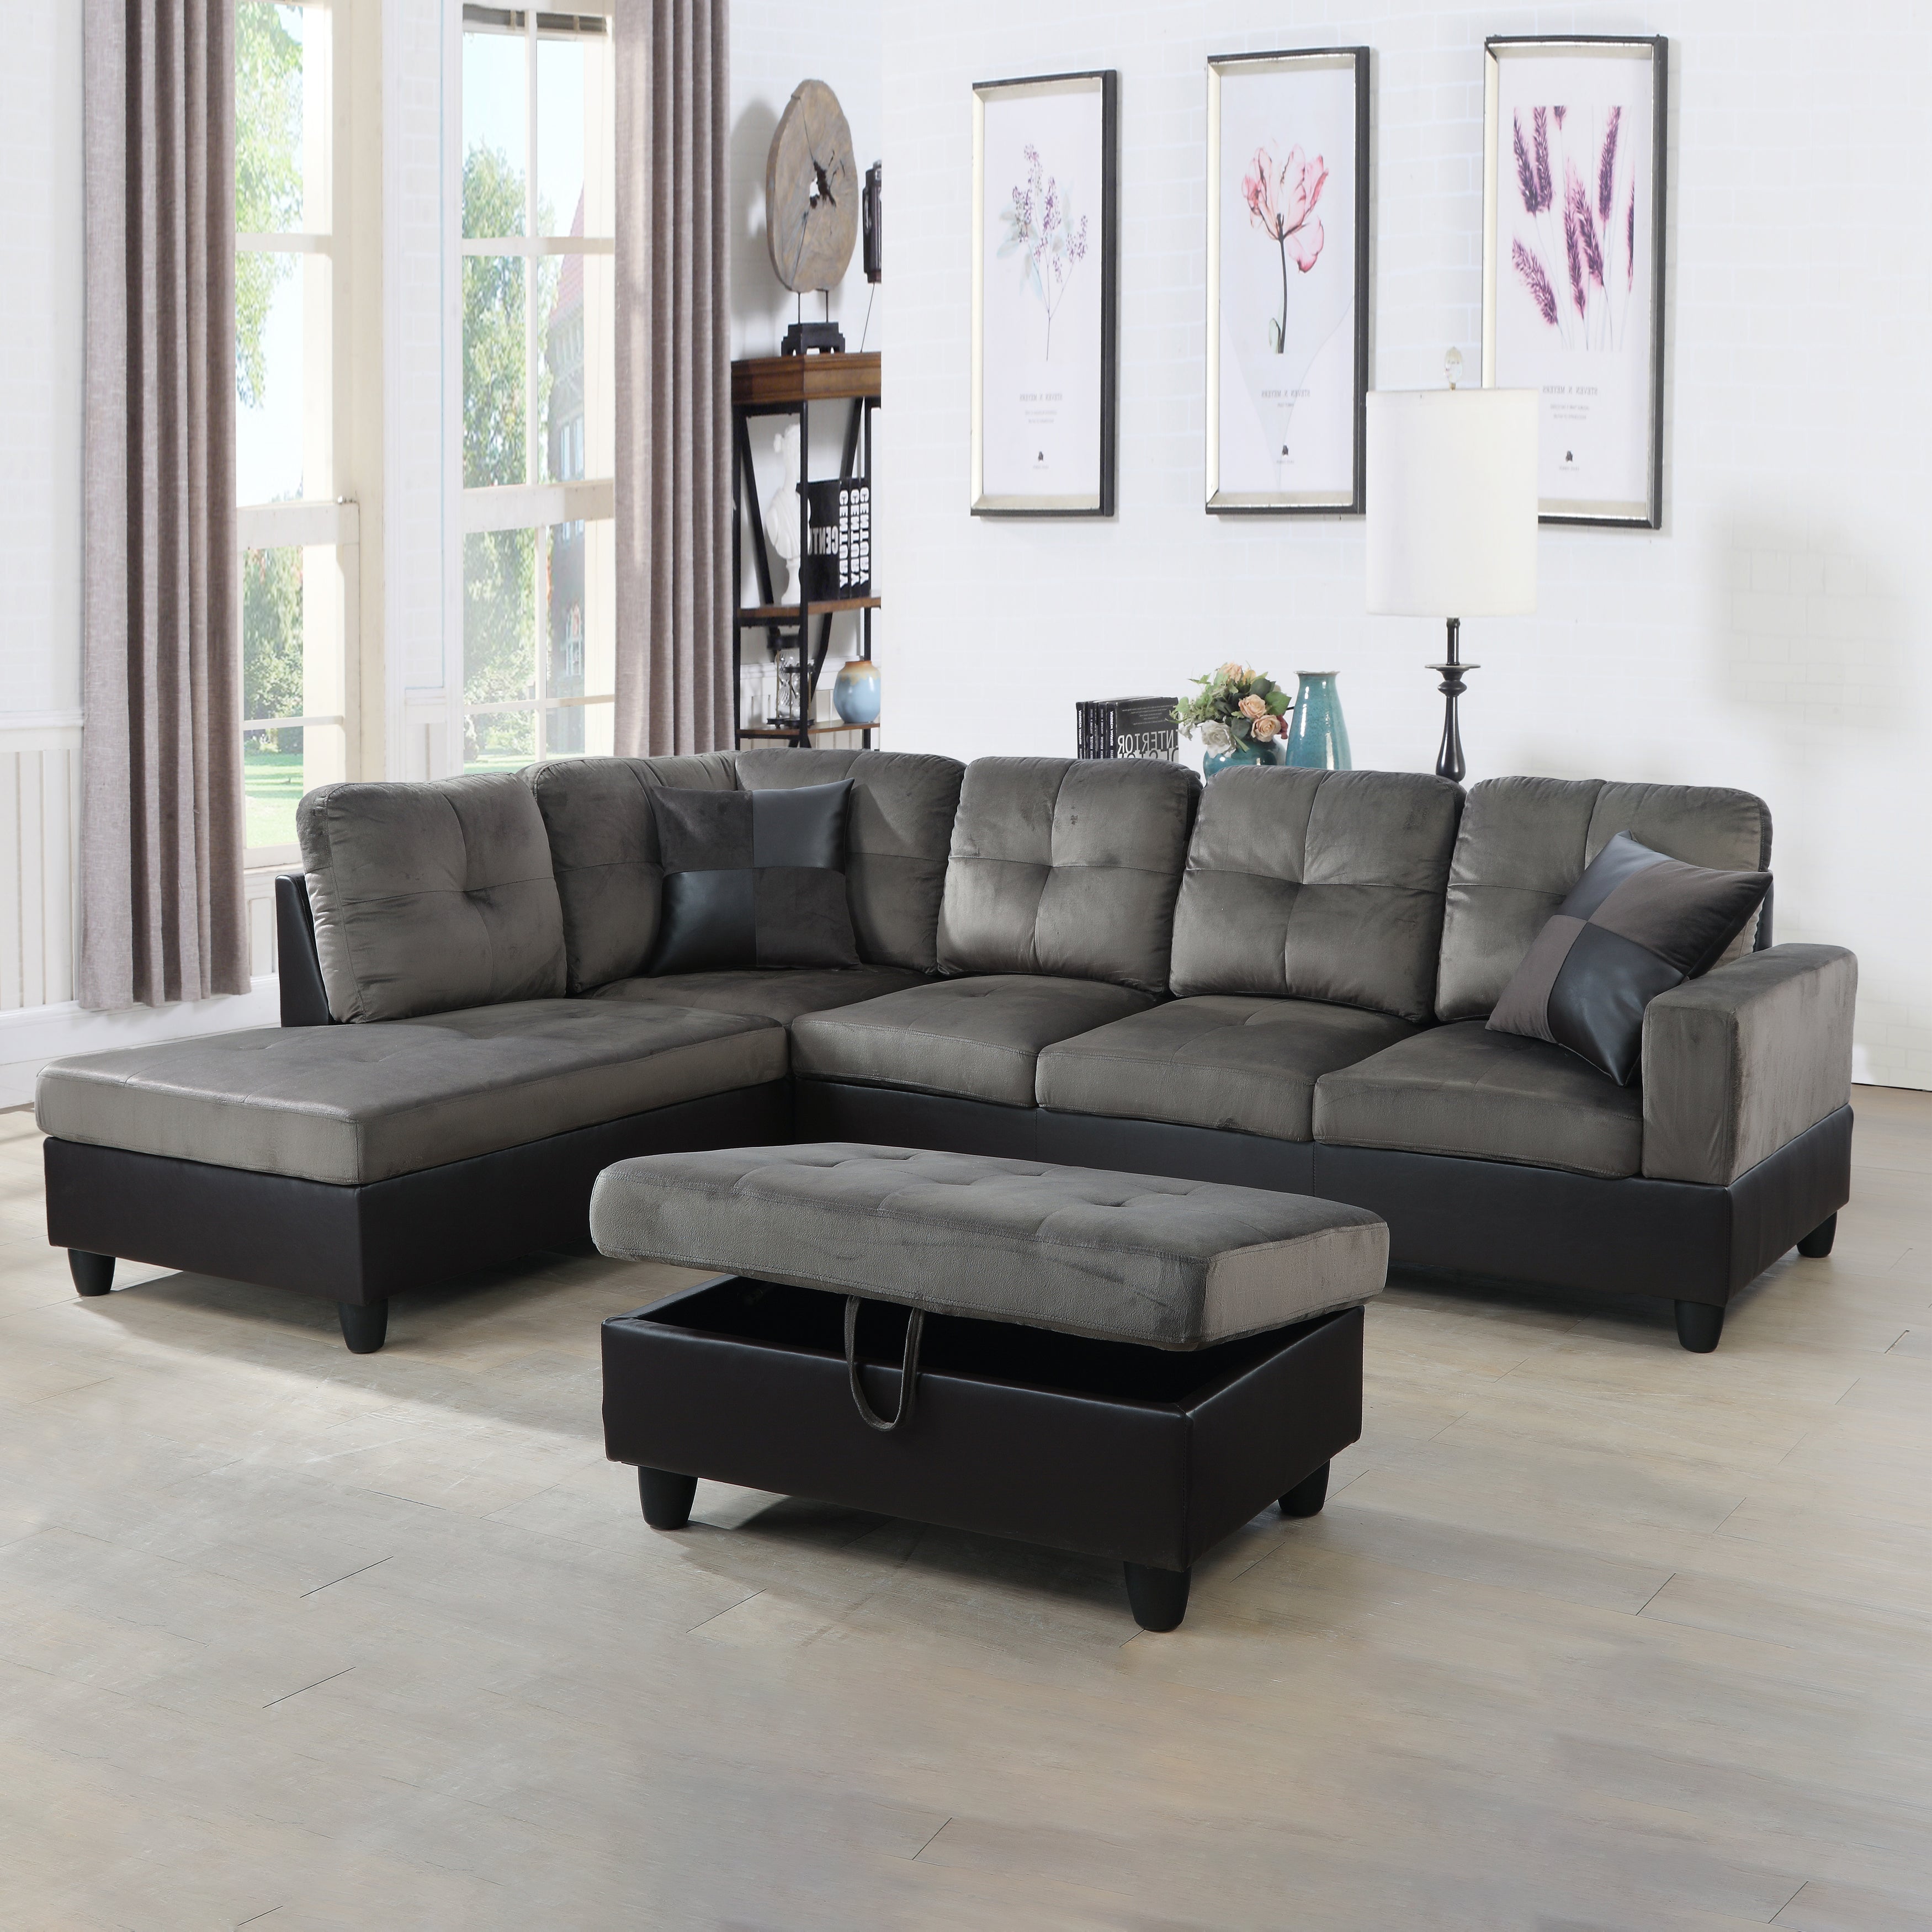 Ainehome Taupe Flannel And PVC 3-Piece Couch Living Room Sofa Set